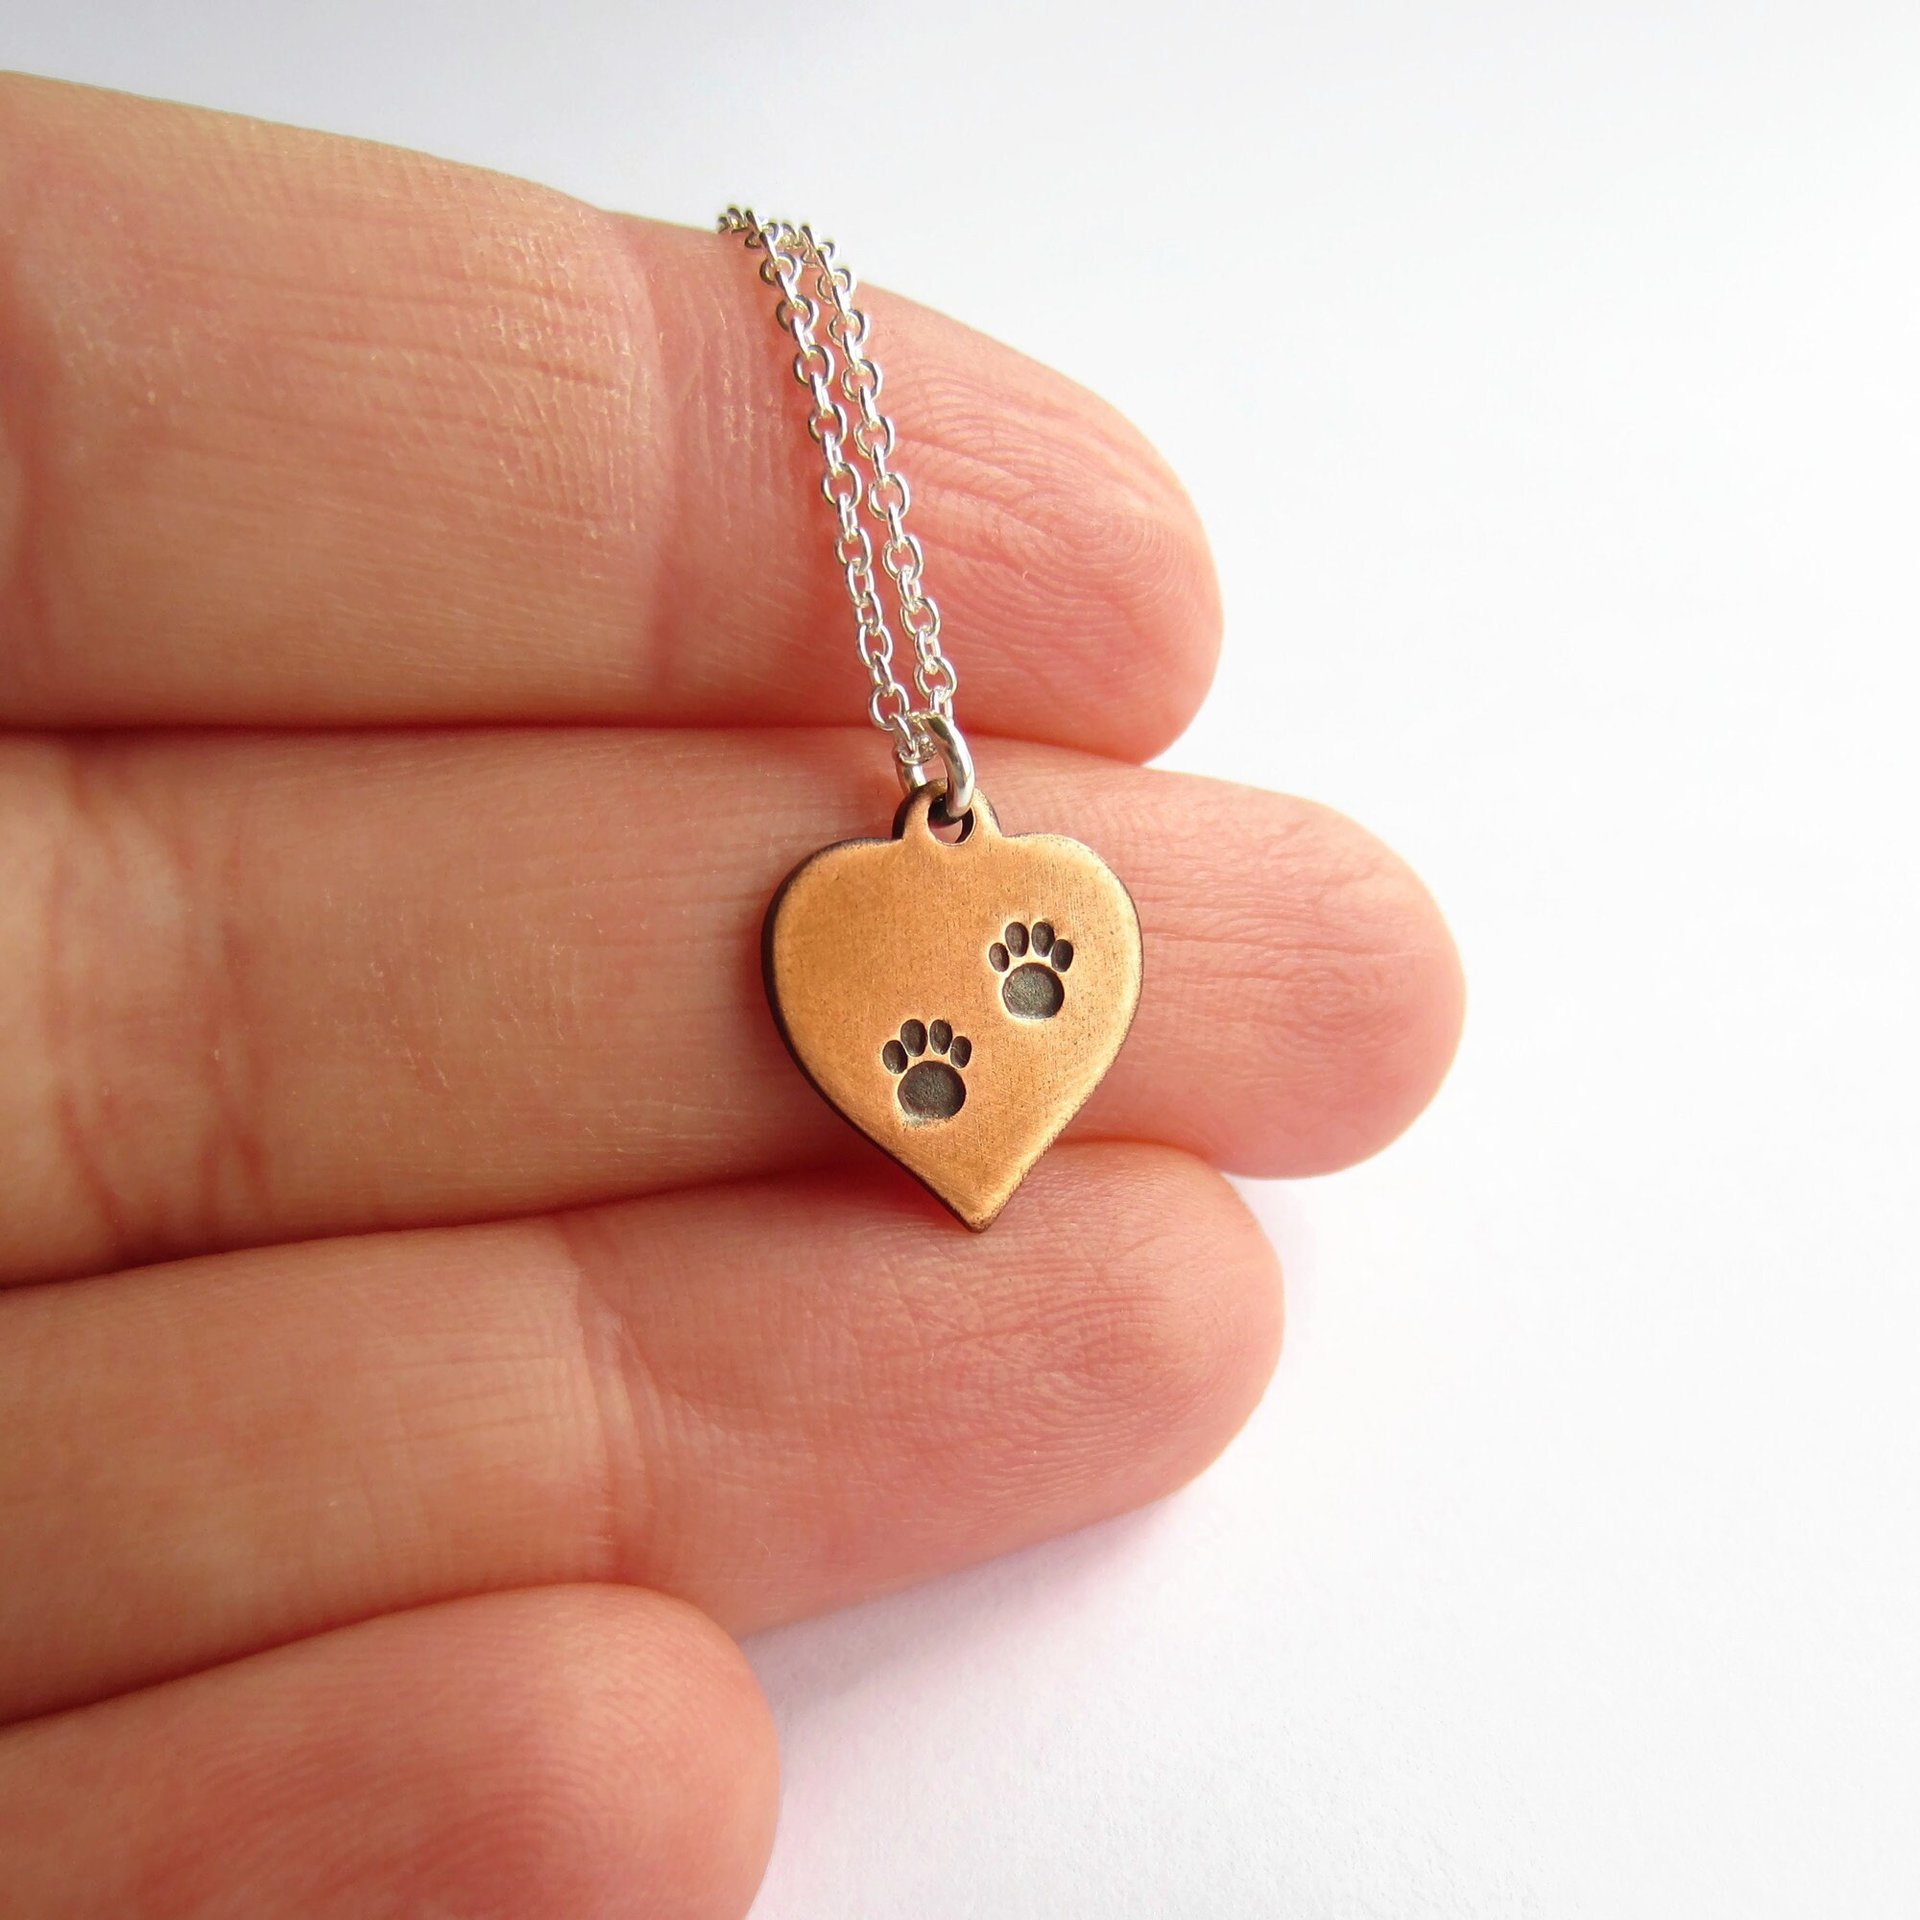 Hand Stamped Copper Paw Print Necklace ~ Handmade by The Tiny Tree Frog Jewellery